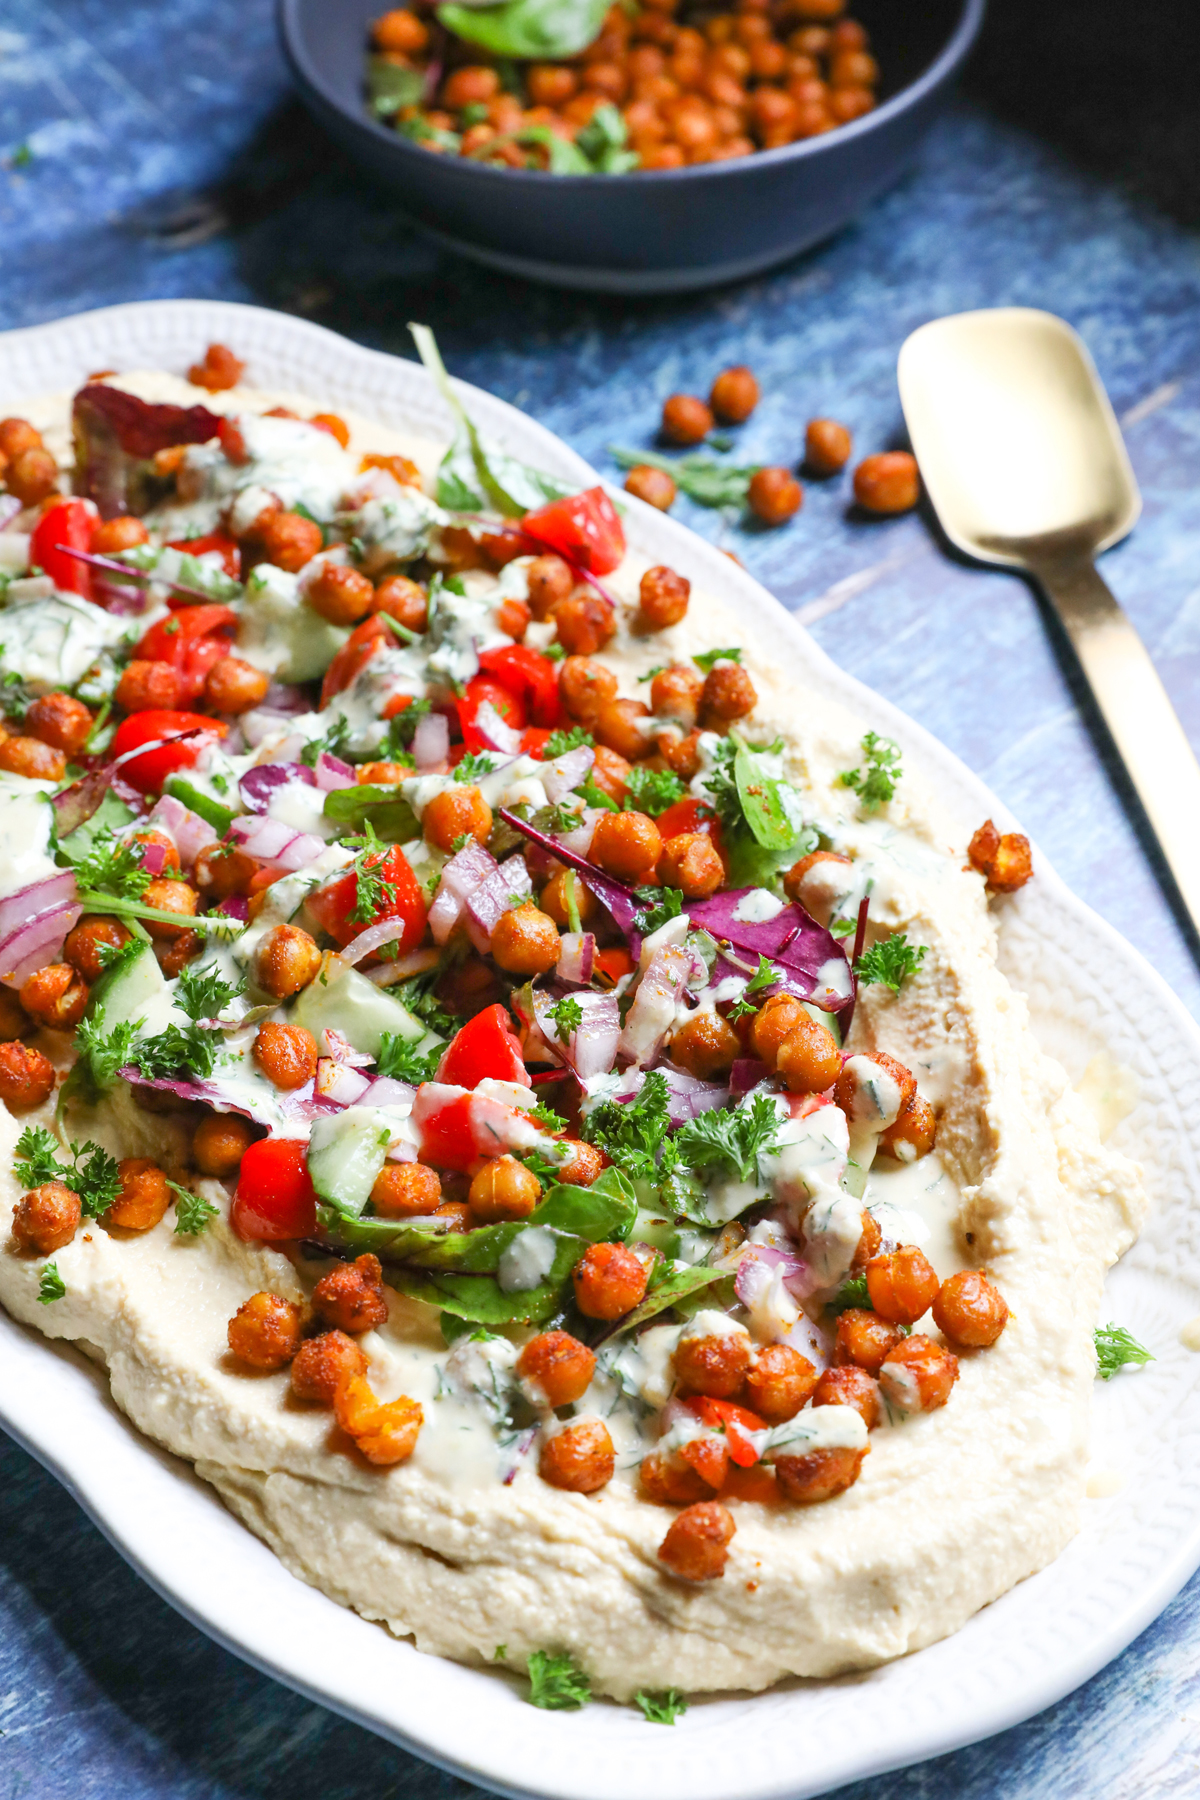 Chickpea and Hummus Salad with Vegan Dressing